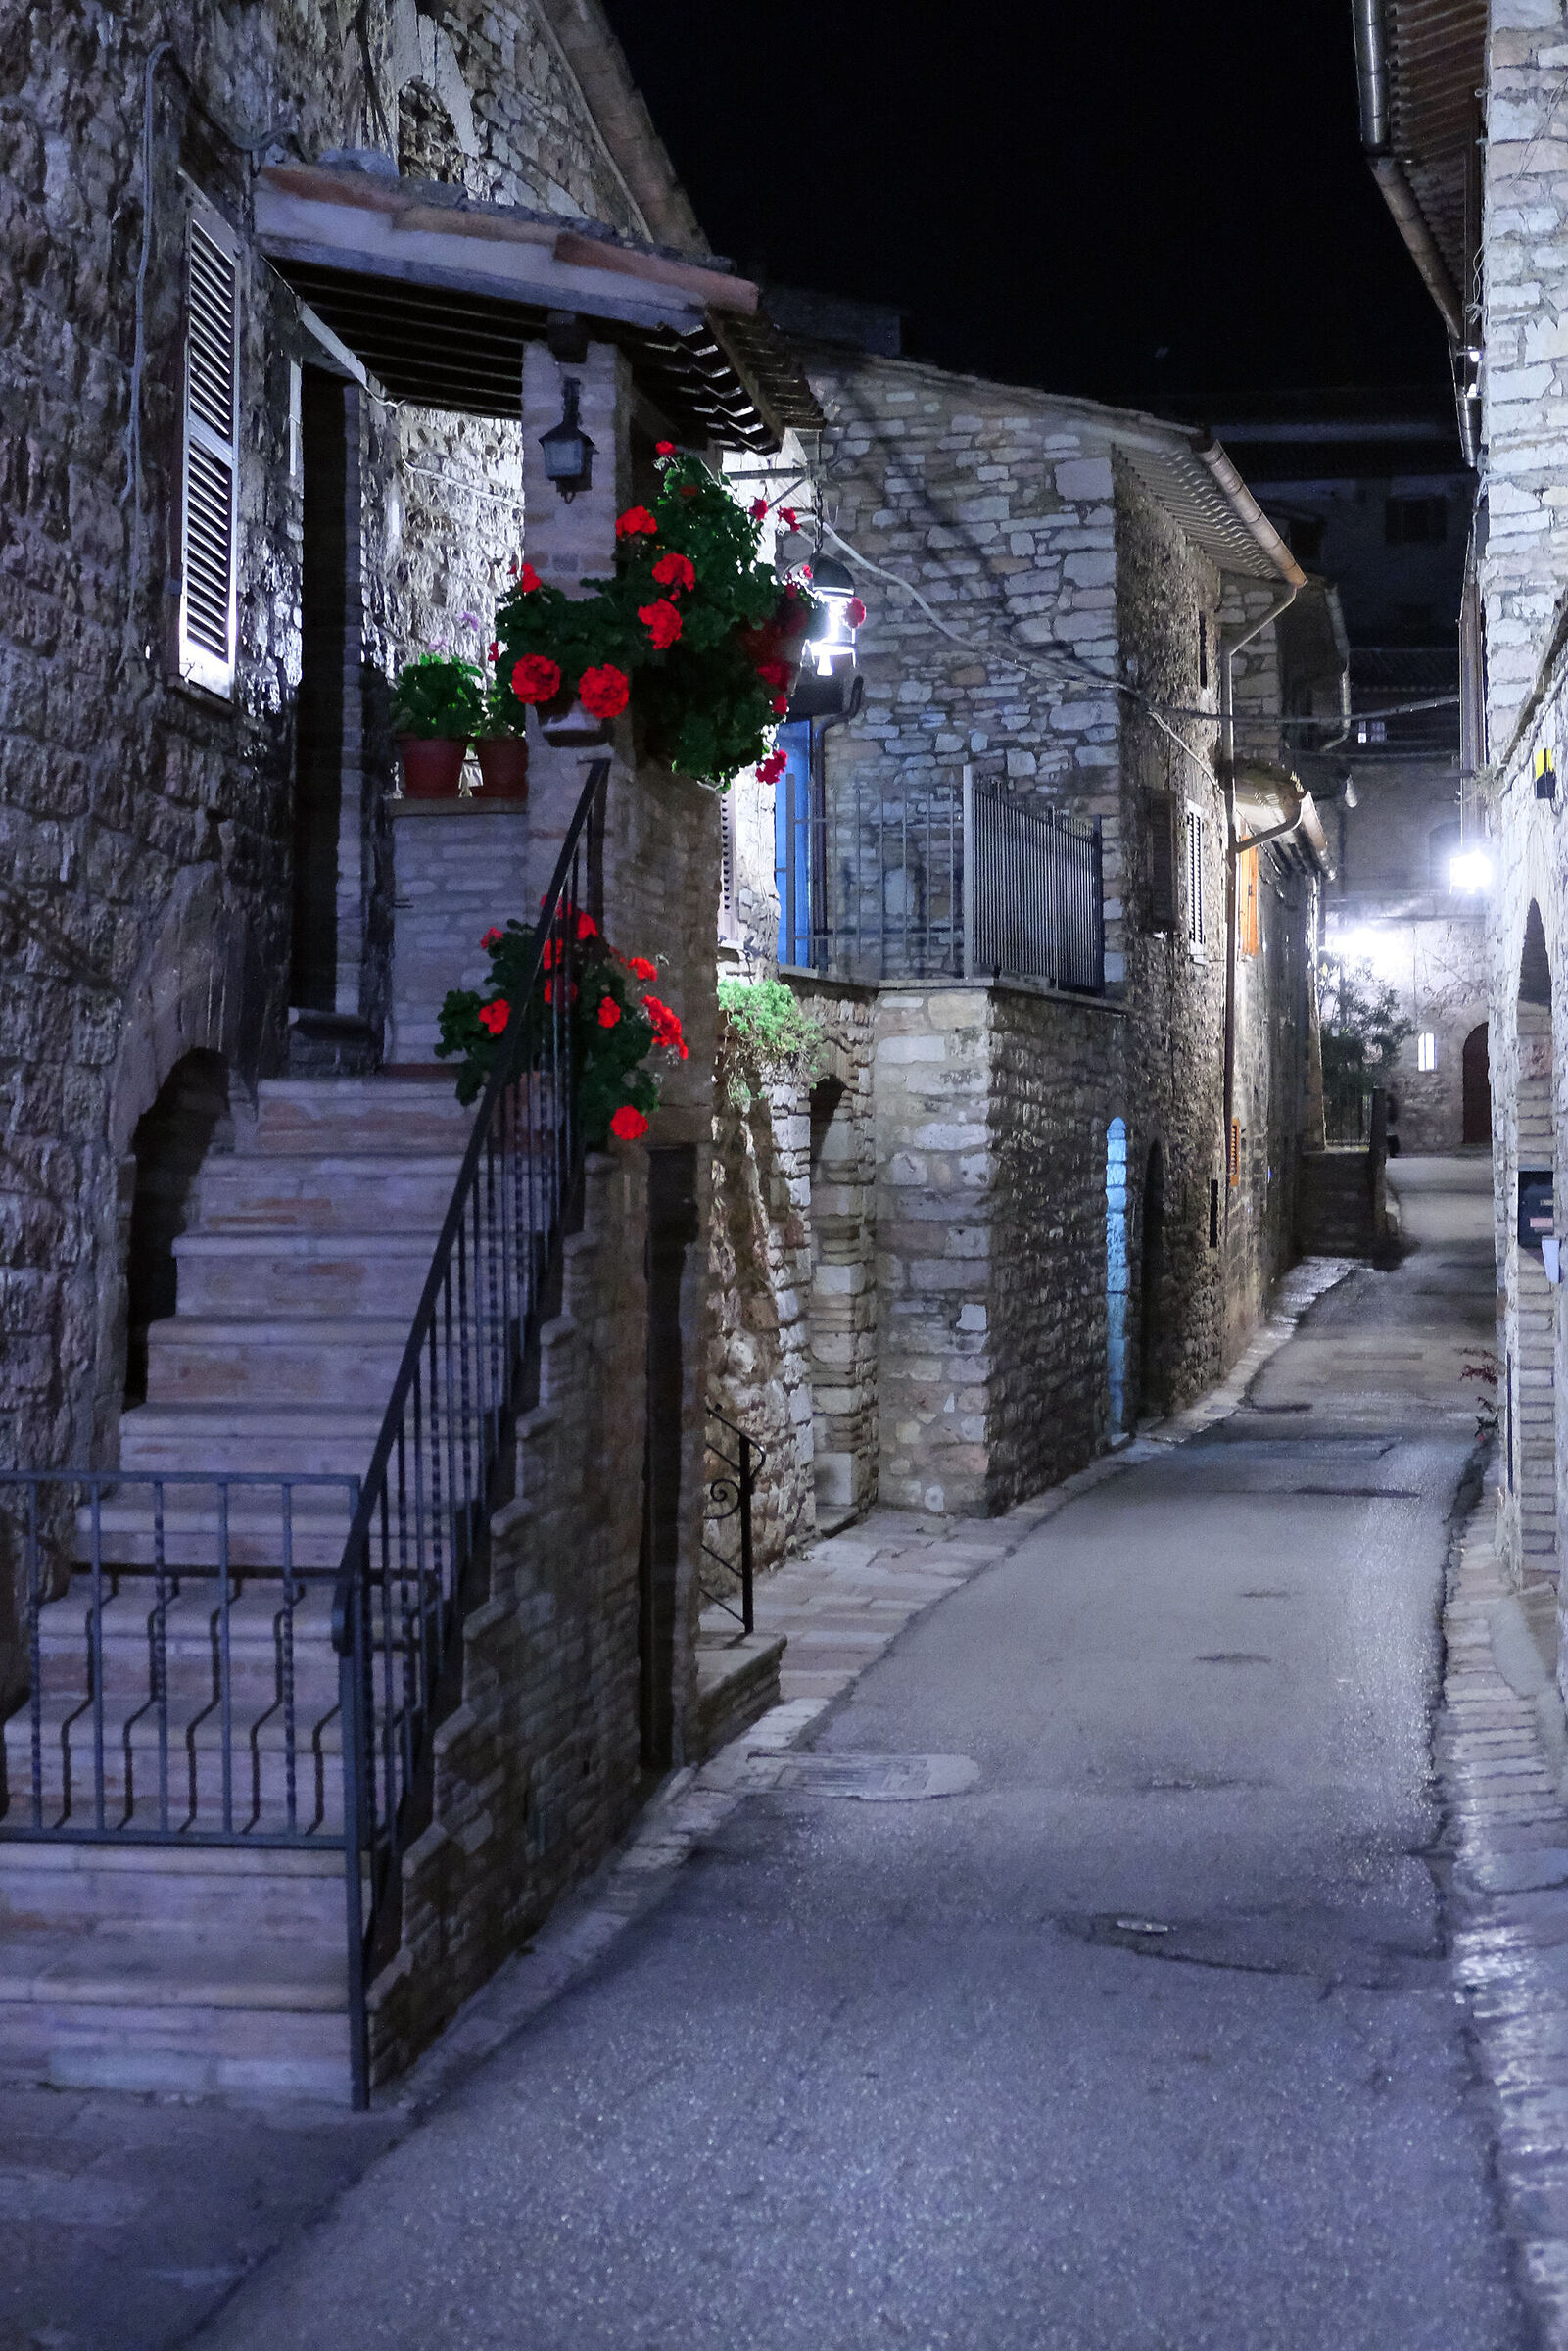 Through the streets of Assisi in the evening .....